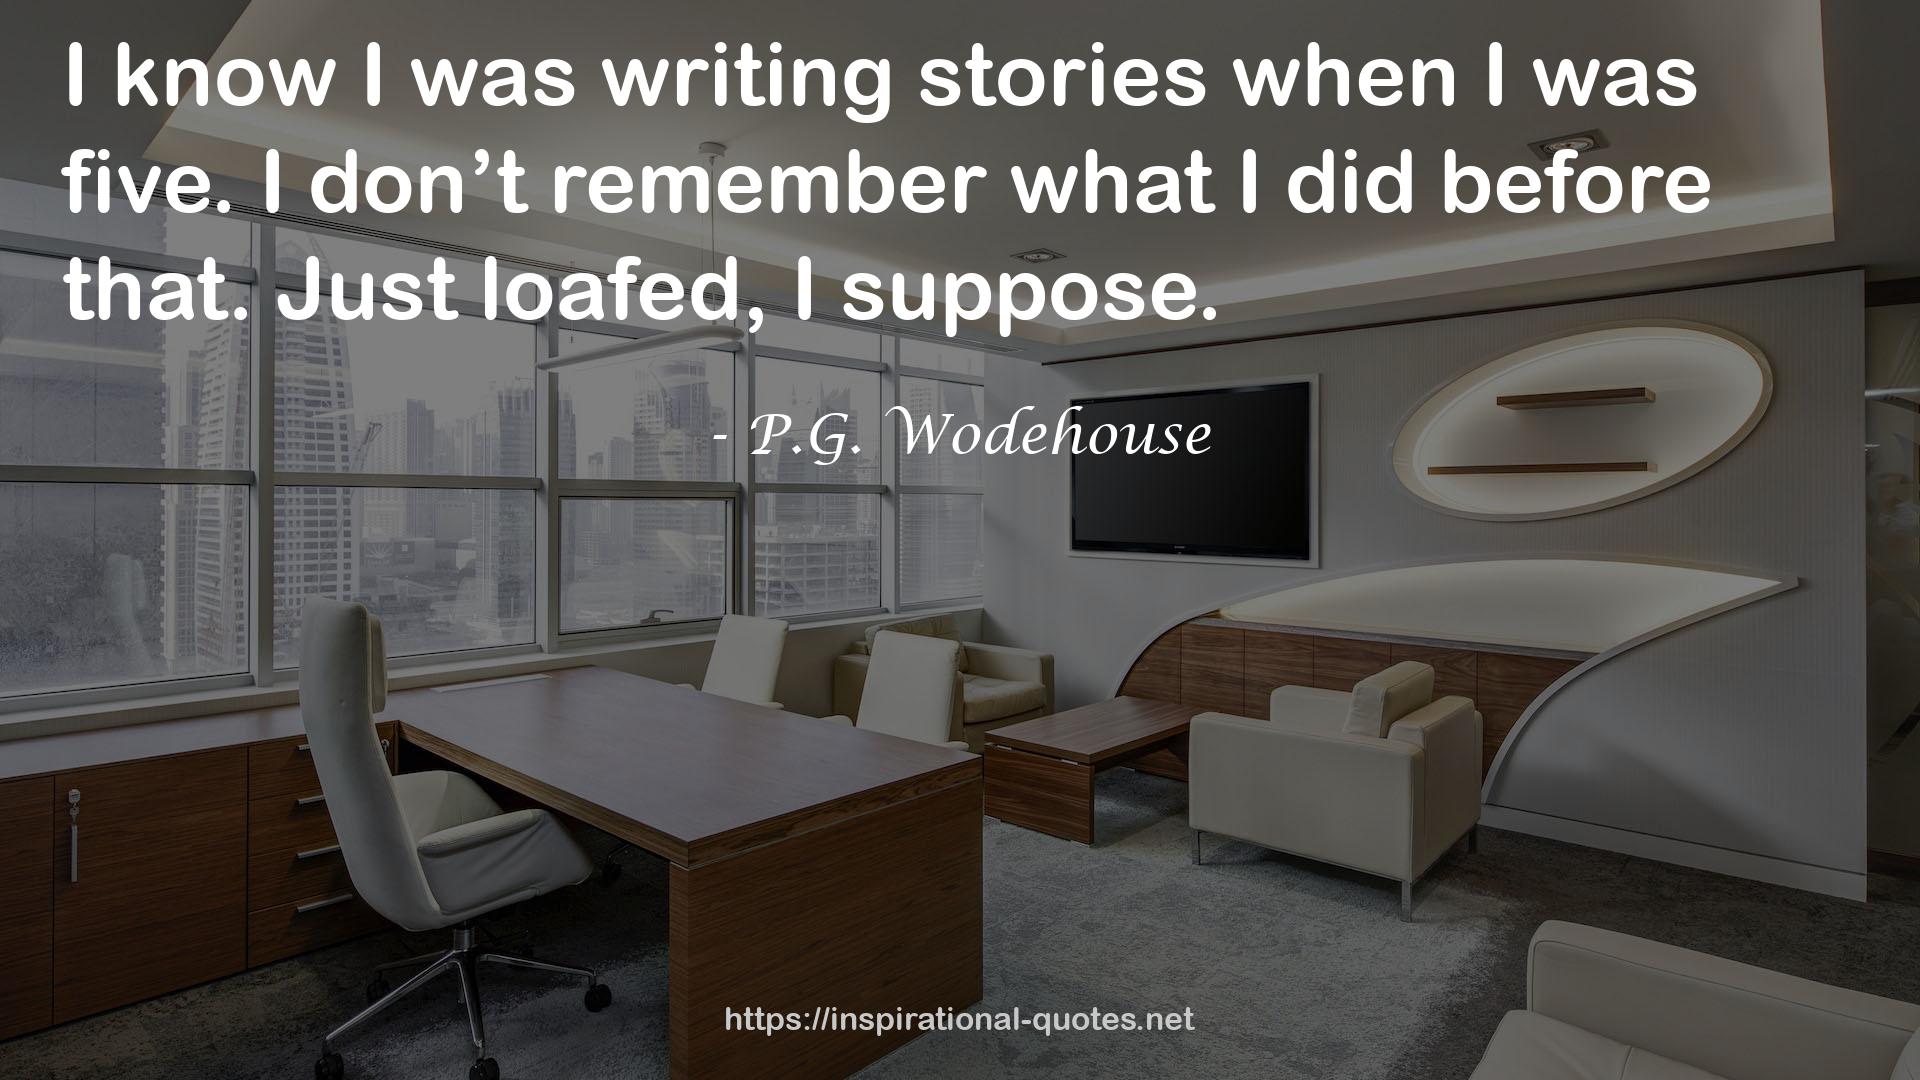 P.G. Wodehouse QUOTES